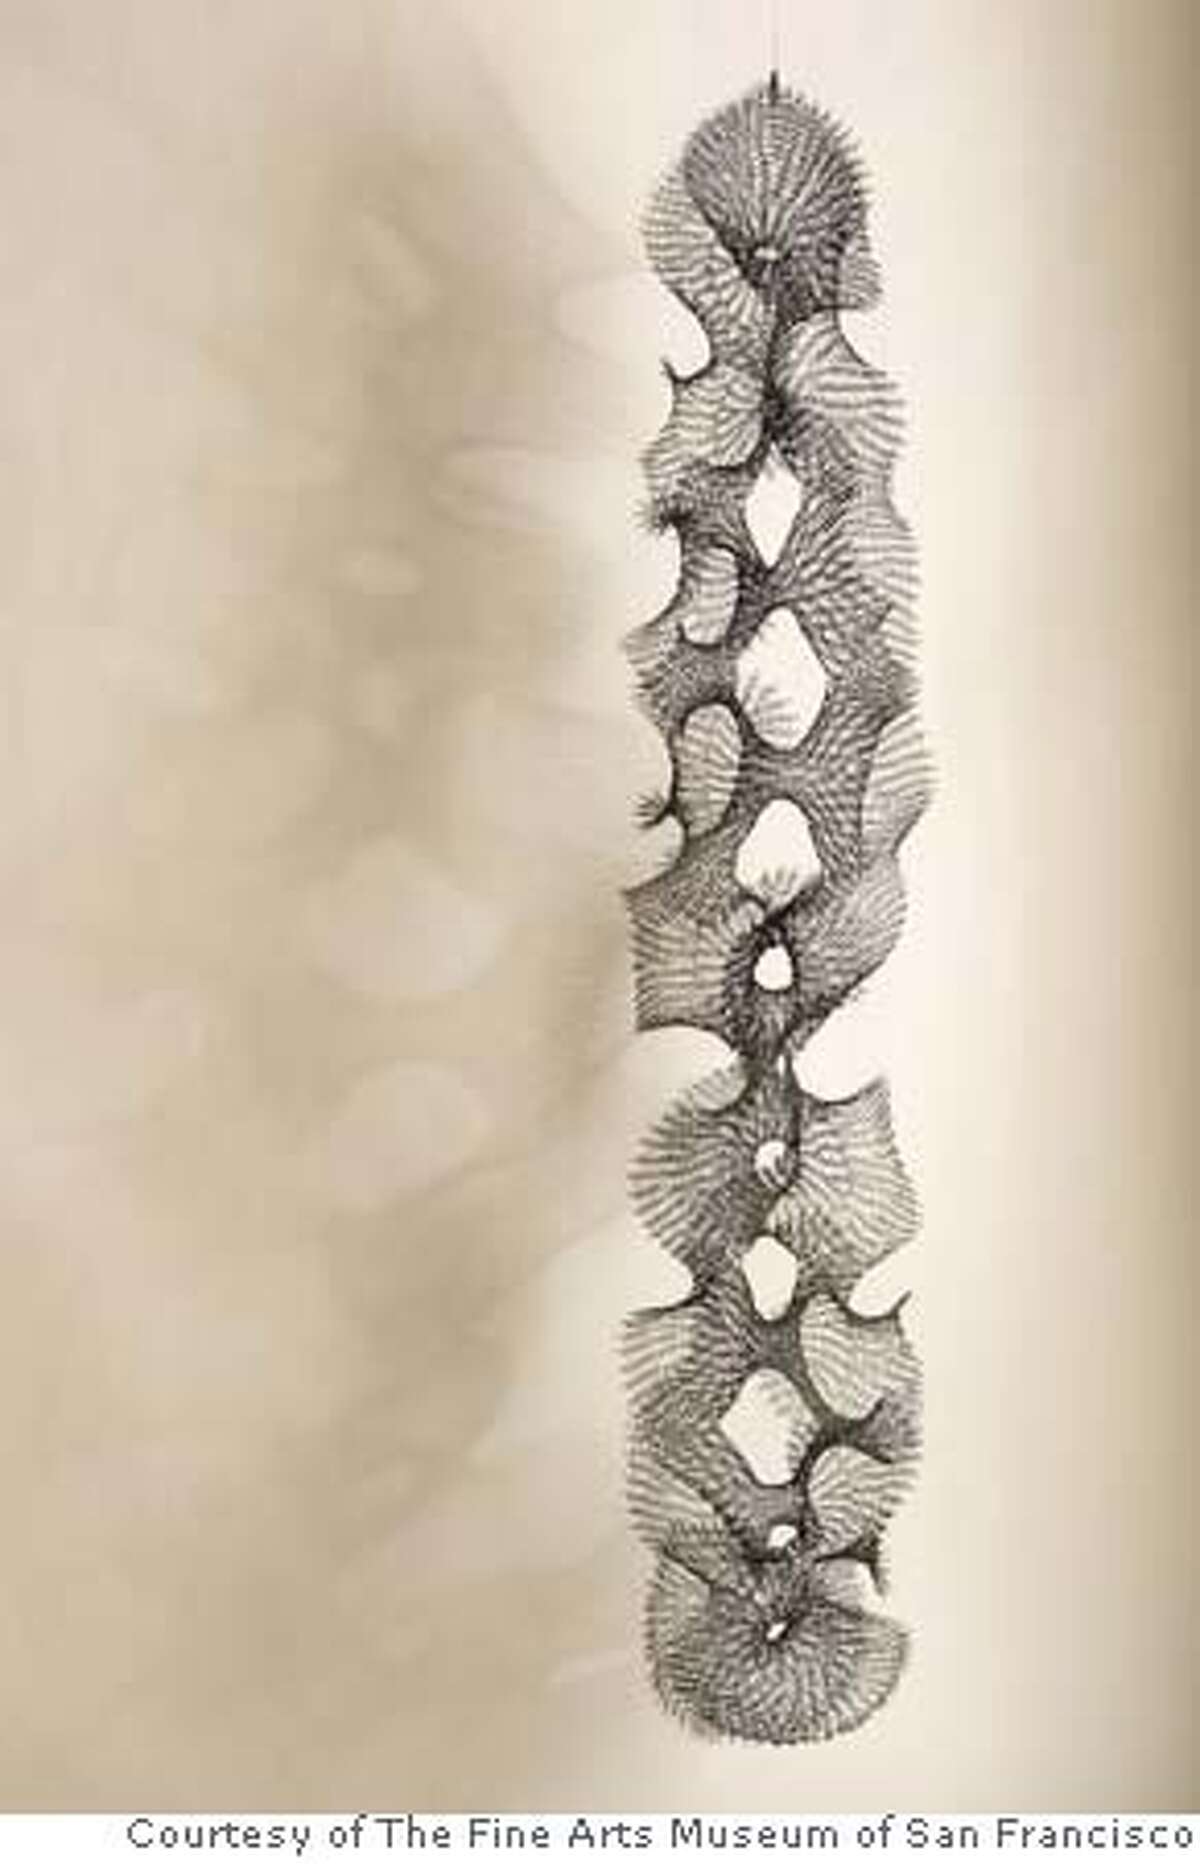 "Untitled (S.433) early 1950's. Copper wire, sculpture by Ruth Asawa, courtesy of The Fine Arts Museum of San Francisco